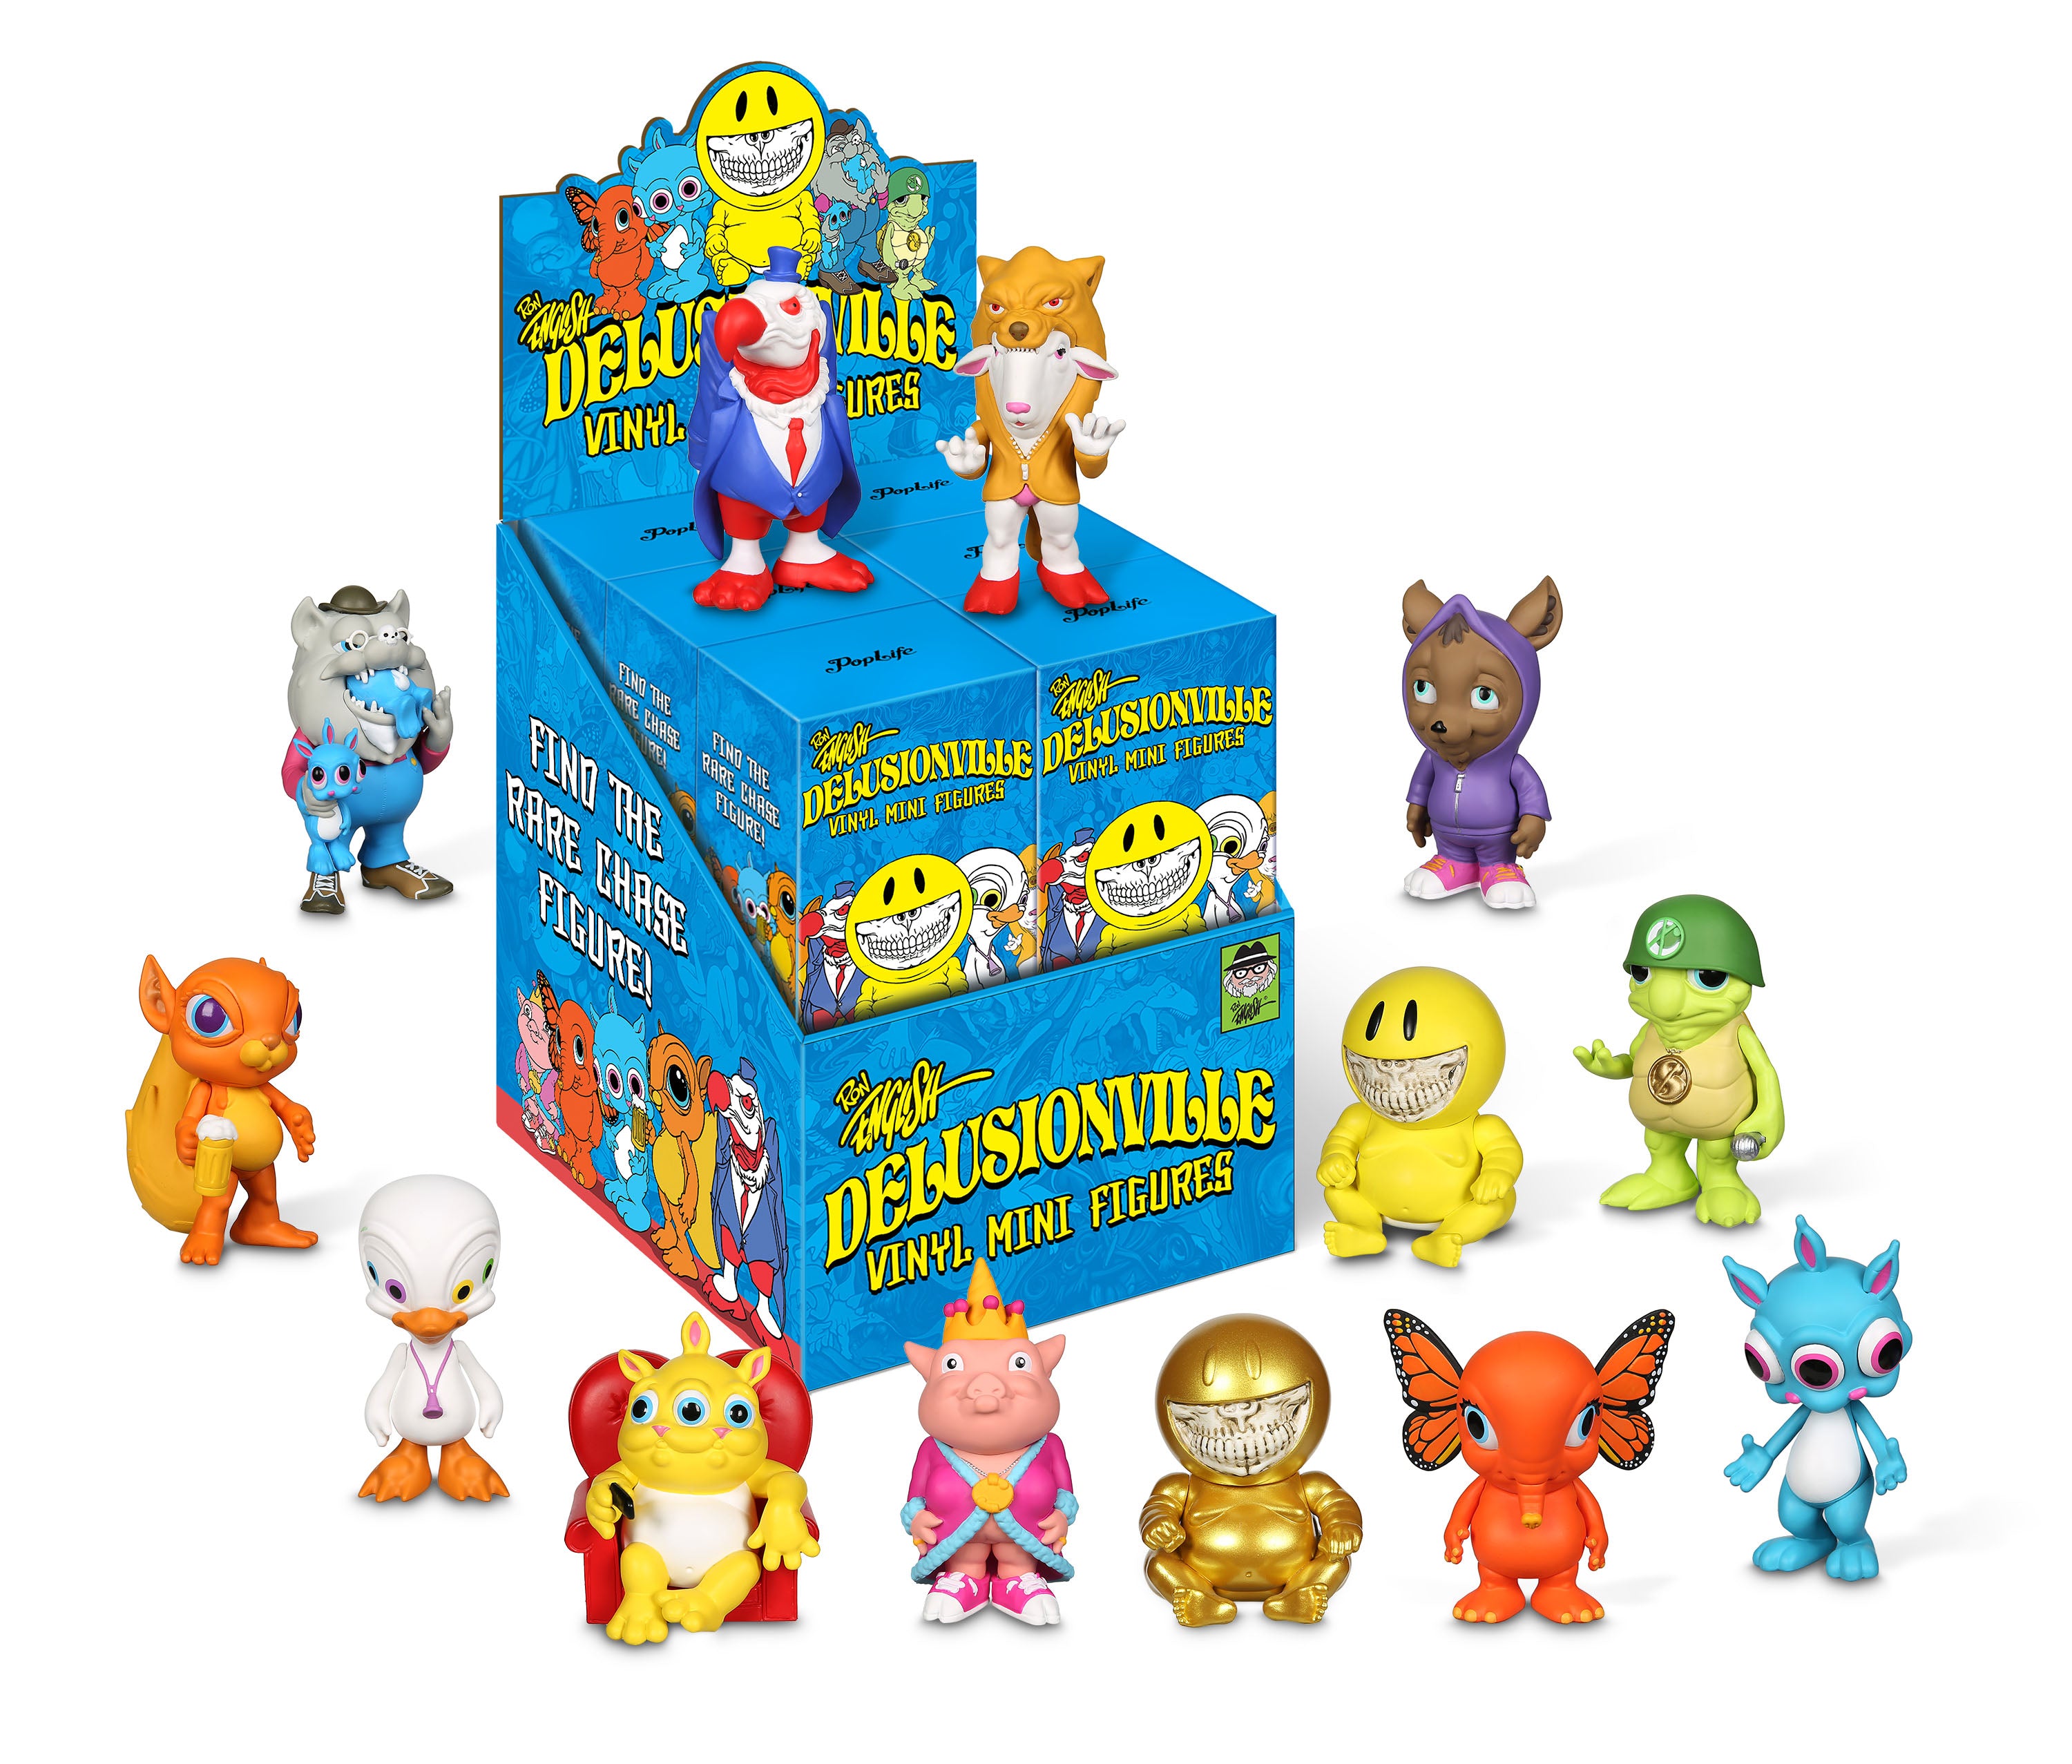 Delusionville Minis by Ron English x Pop Life toy collection featuring various whimsical characters including an orange elephant with butterfly wings, a blue cartoon animal, and a gold figurine with a skull face.